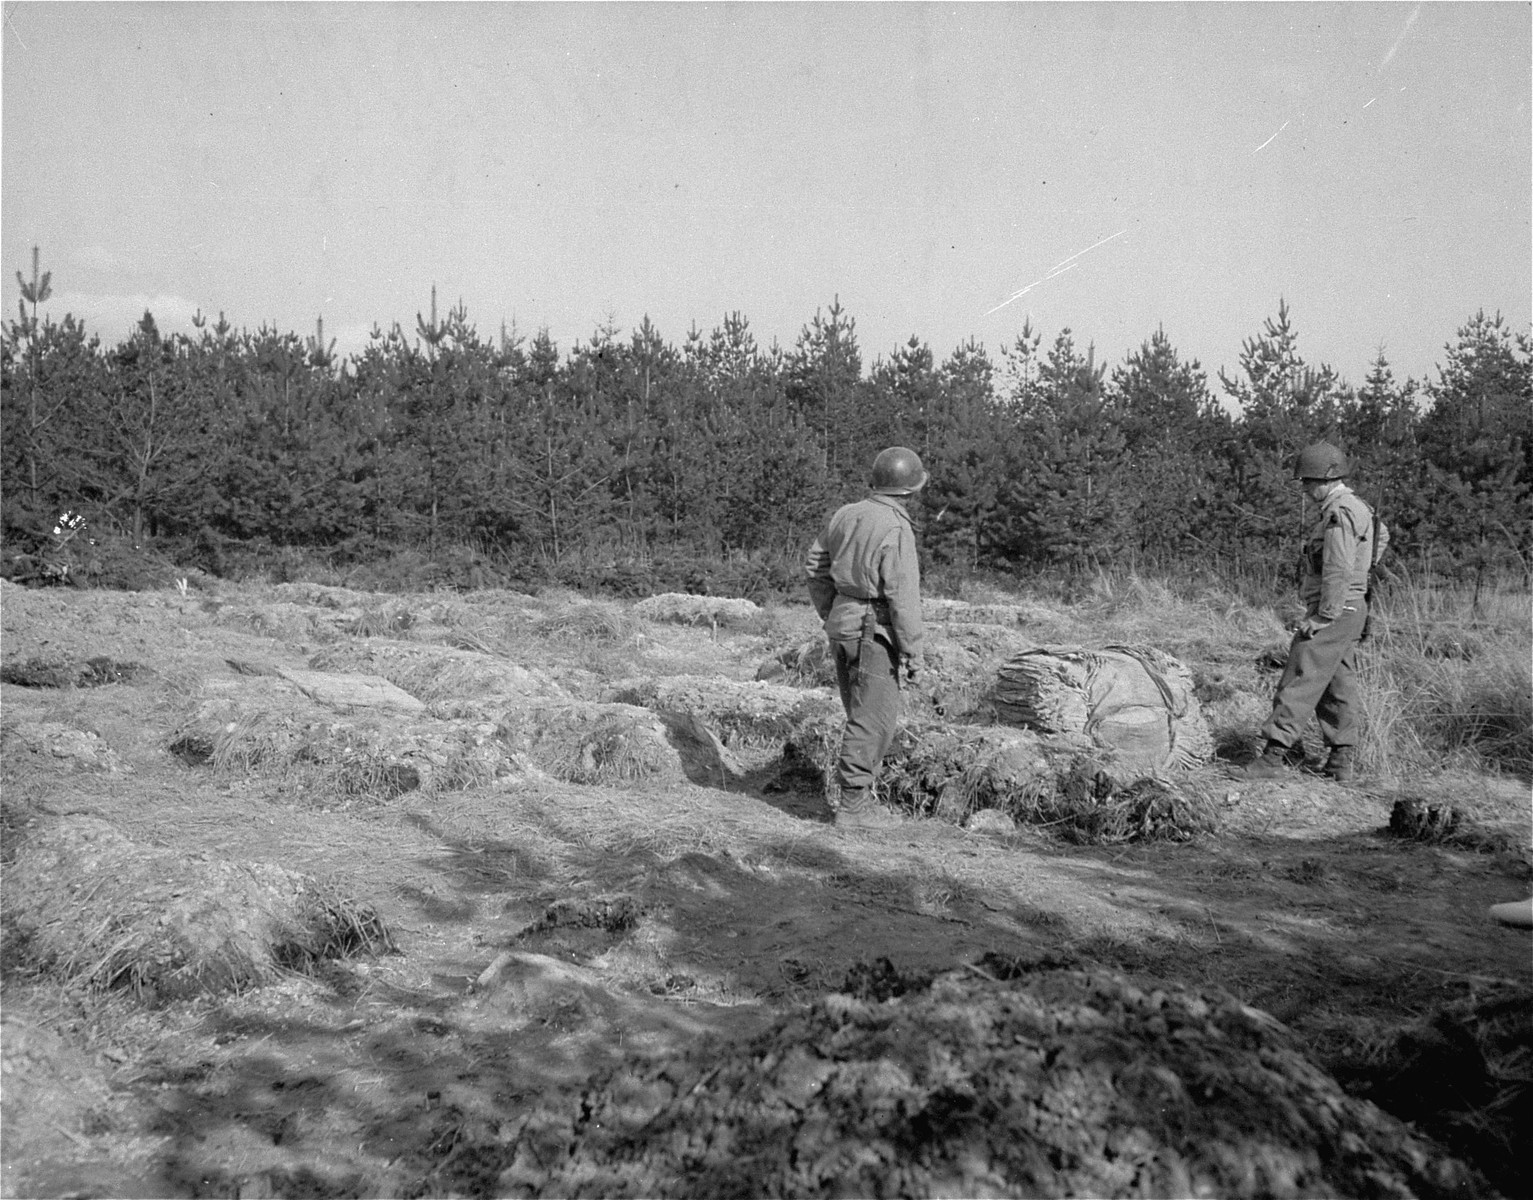 Two U.S. soldiers with the 9th Armored Division stand in the middle of a field of graves, near the Flossenbuerg concentration camp.